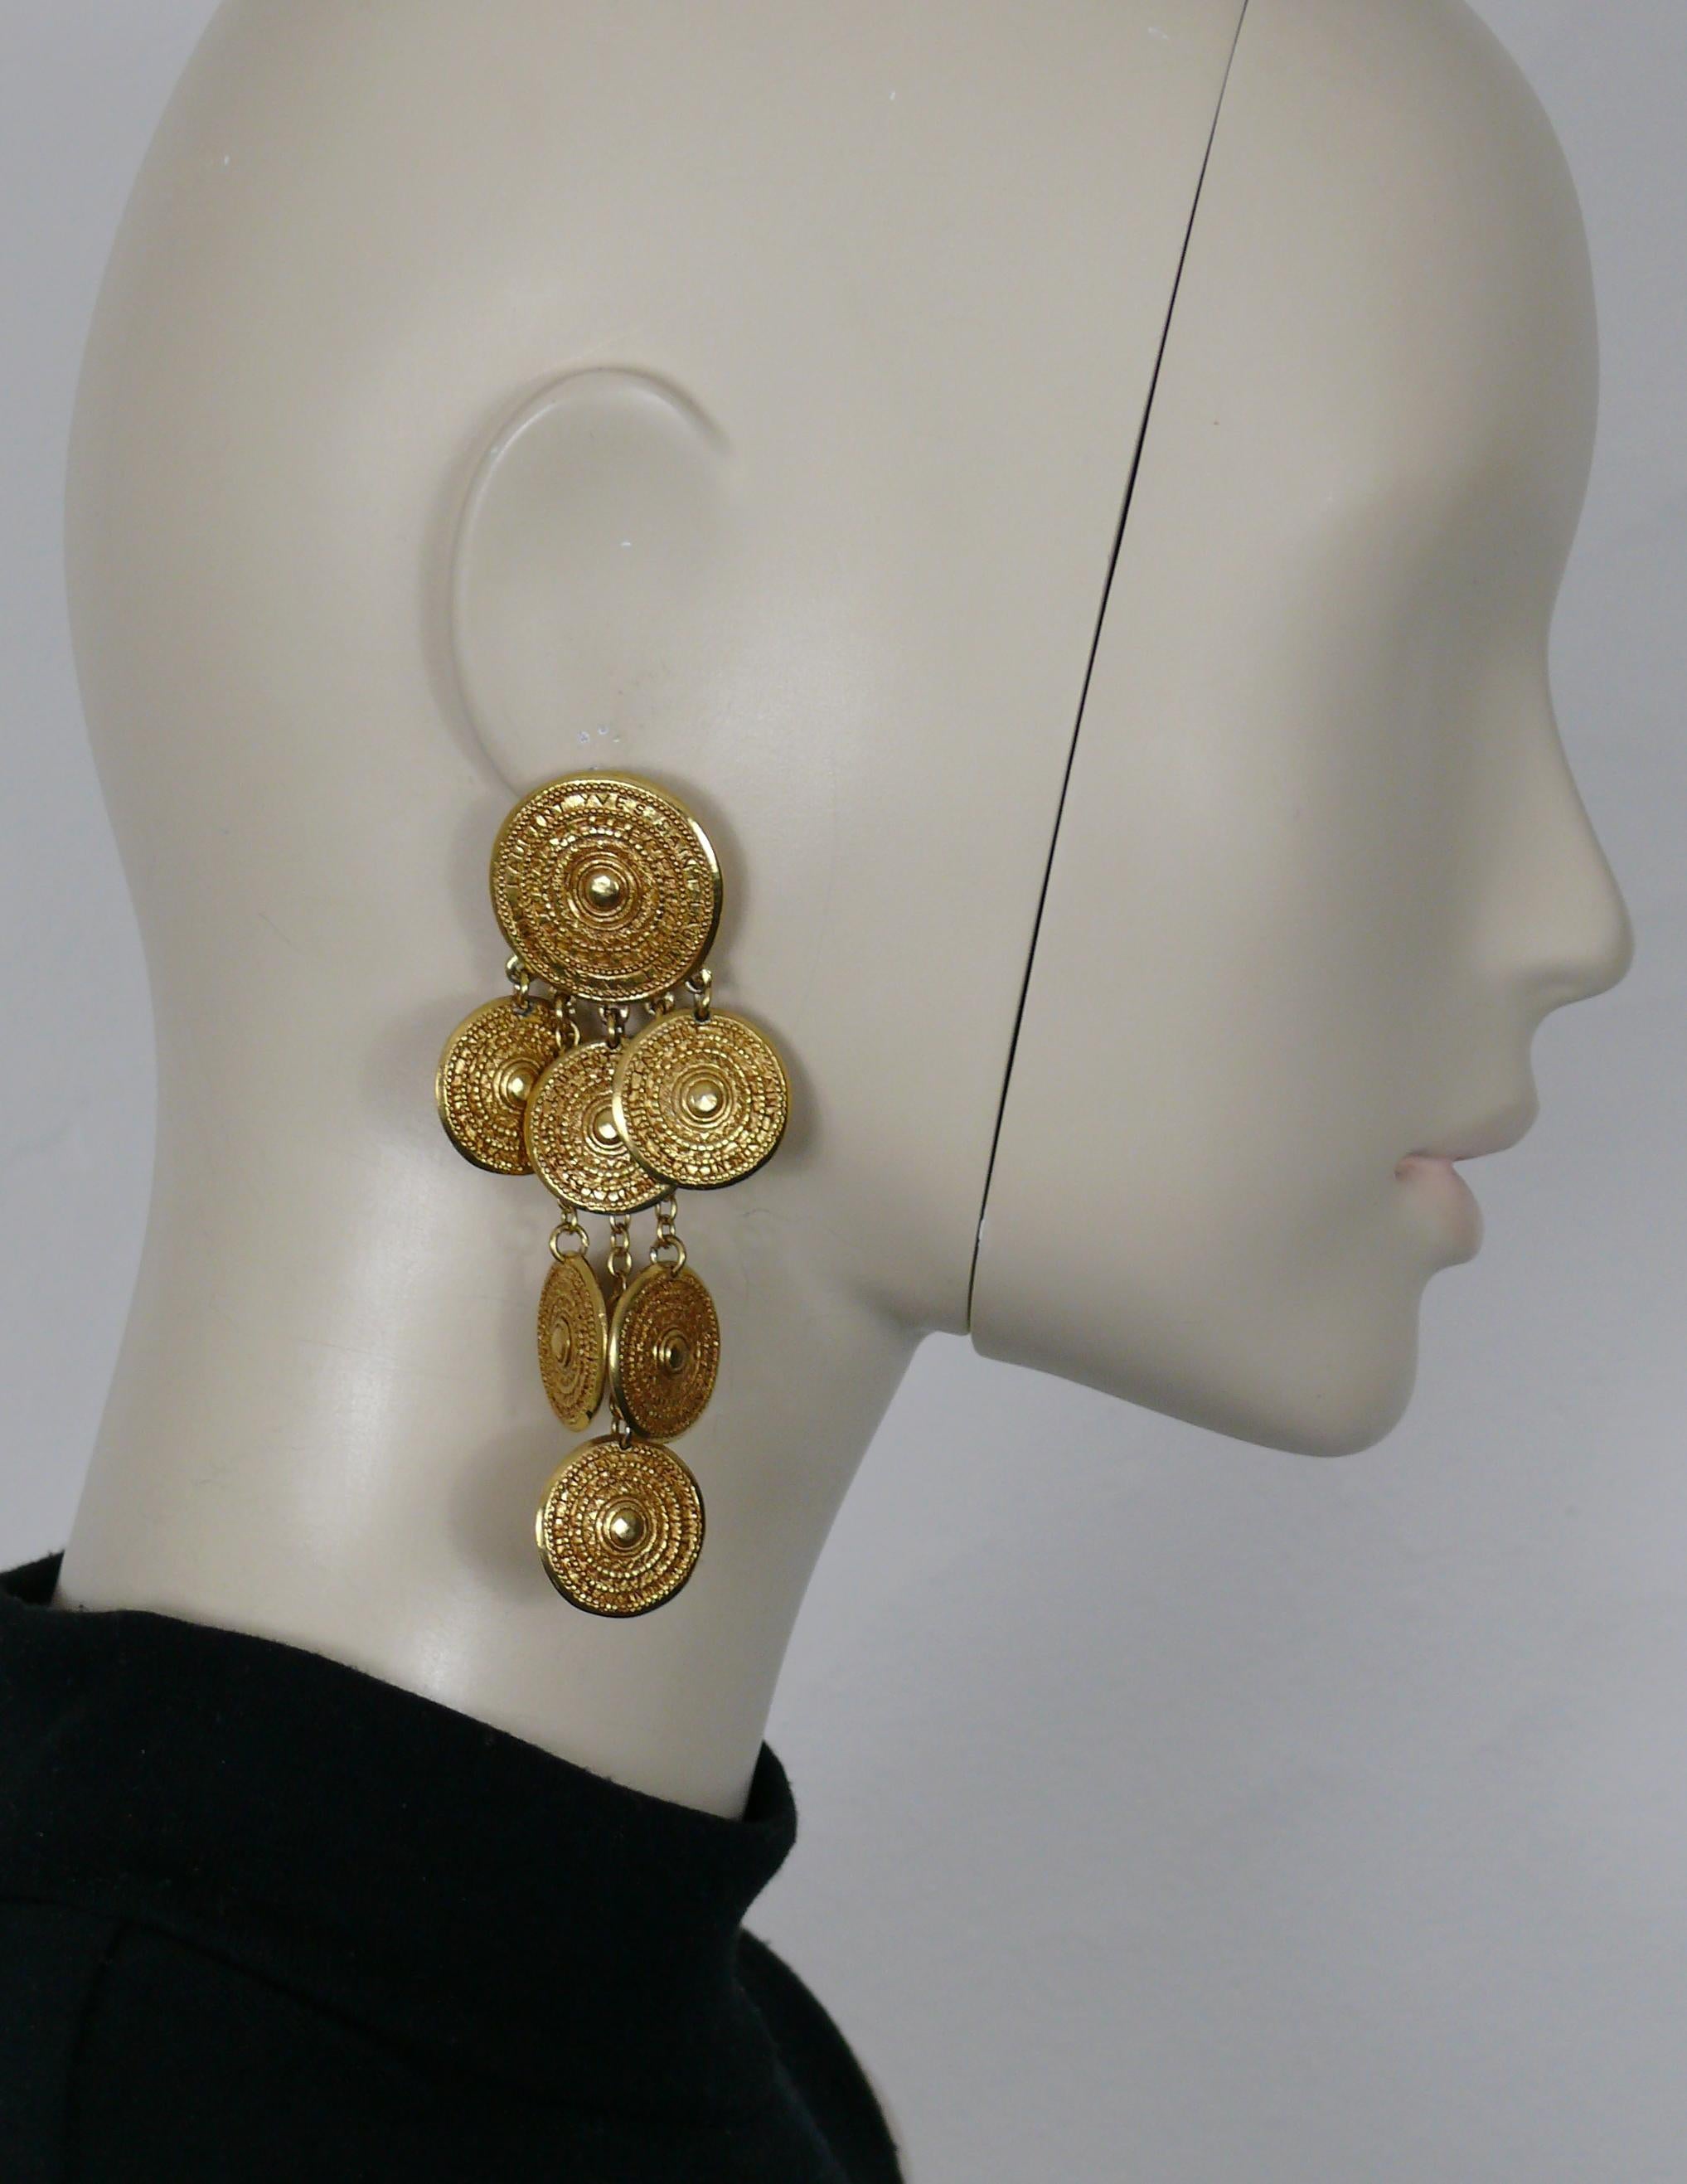 YVES SAINT LAURENT vintage gold tone dangling earrings (clip-on) featuring cascading ethnic Aztec pattern discs engraved Yves Saint Laurent.

Embossed YSL.
Made in France.

Indicative measurements : height approx. 10 cm (3.94 inches) / max. diameter